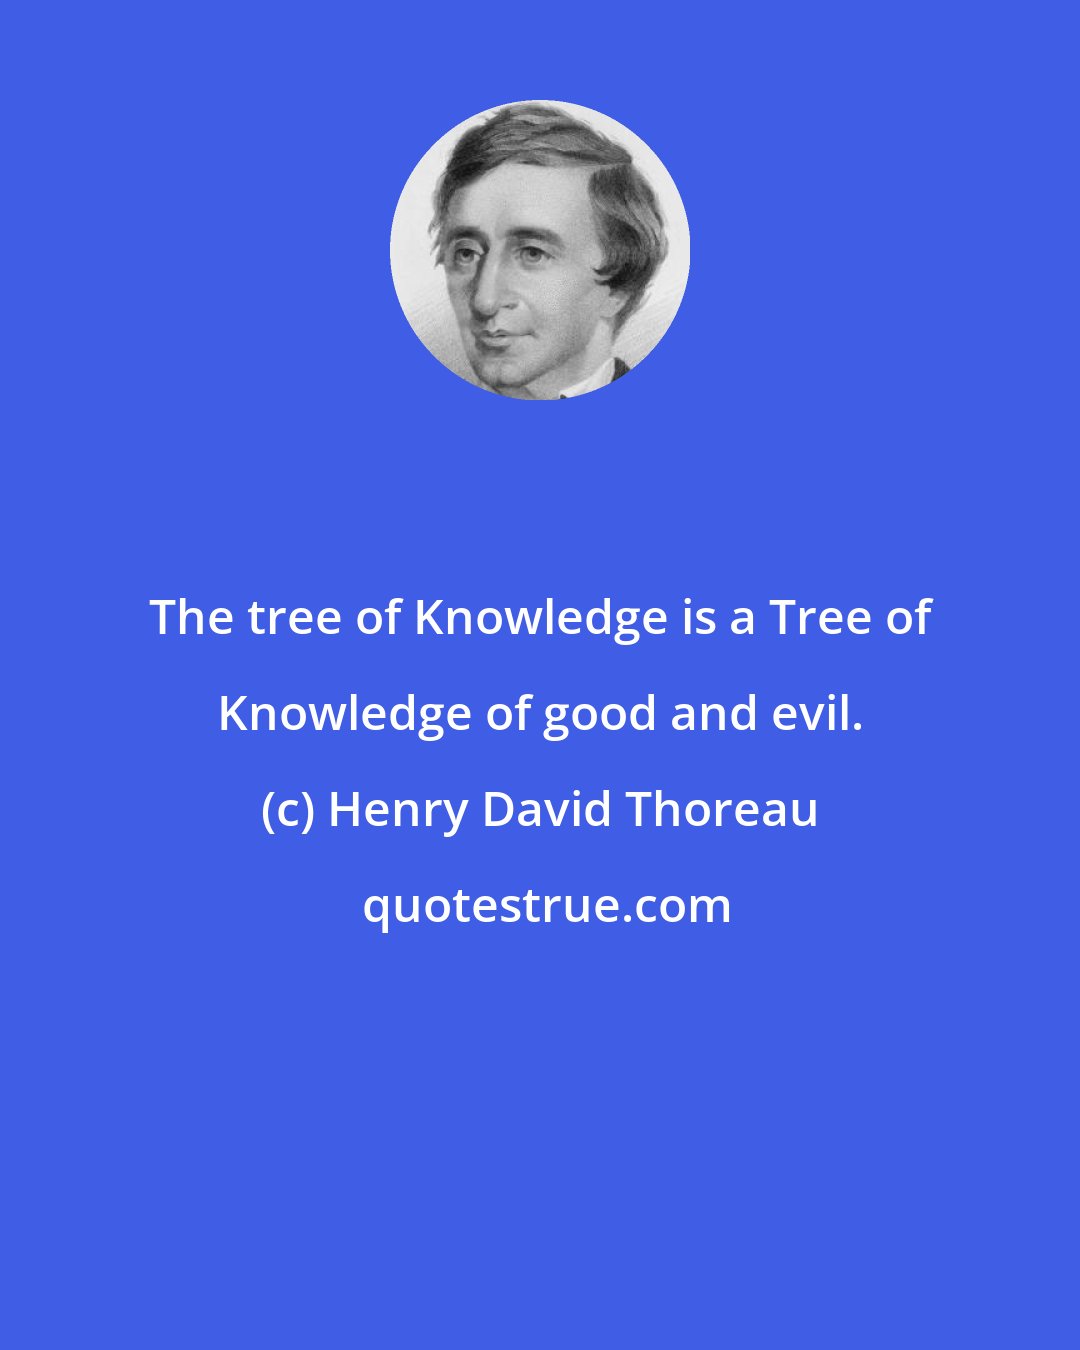 Henry David Thoreau: The tree of Knowledge is a Tree of Knowledge of good and evil.